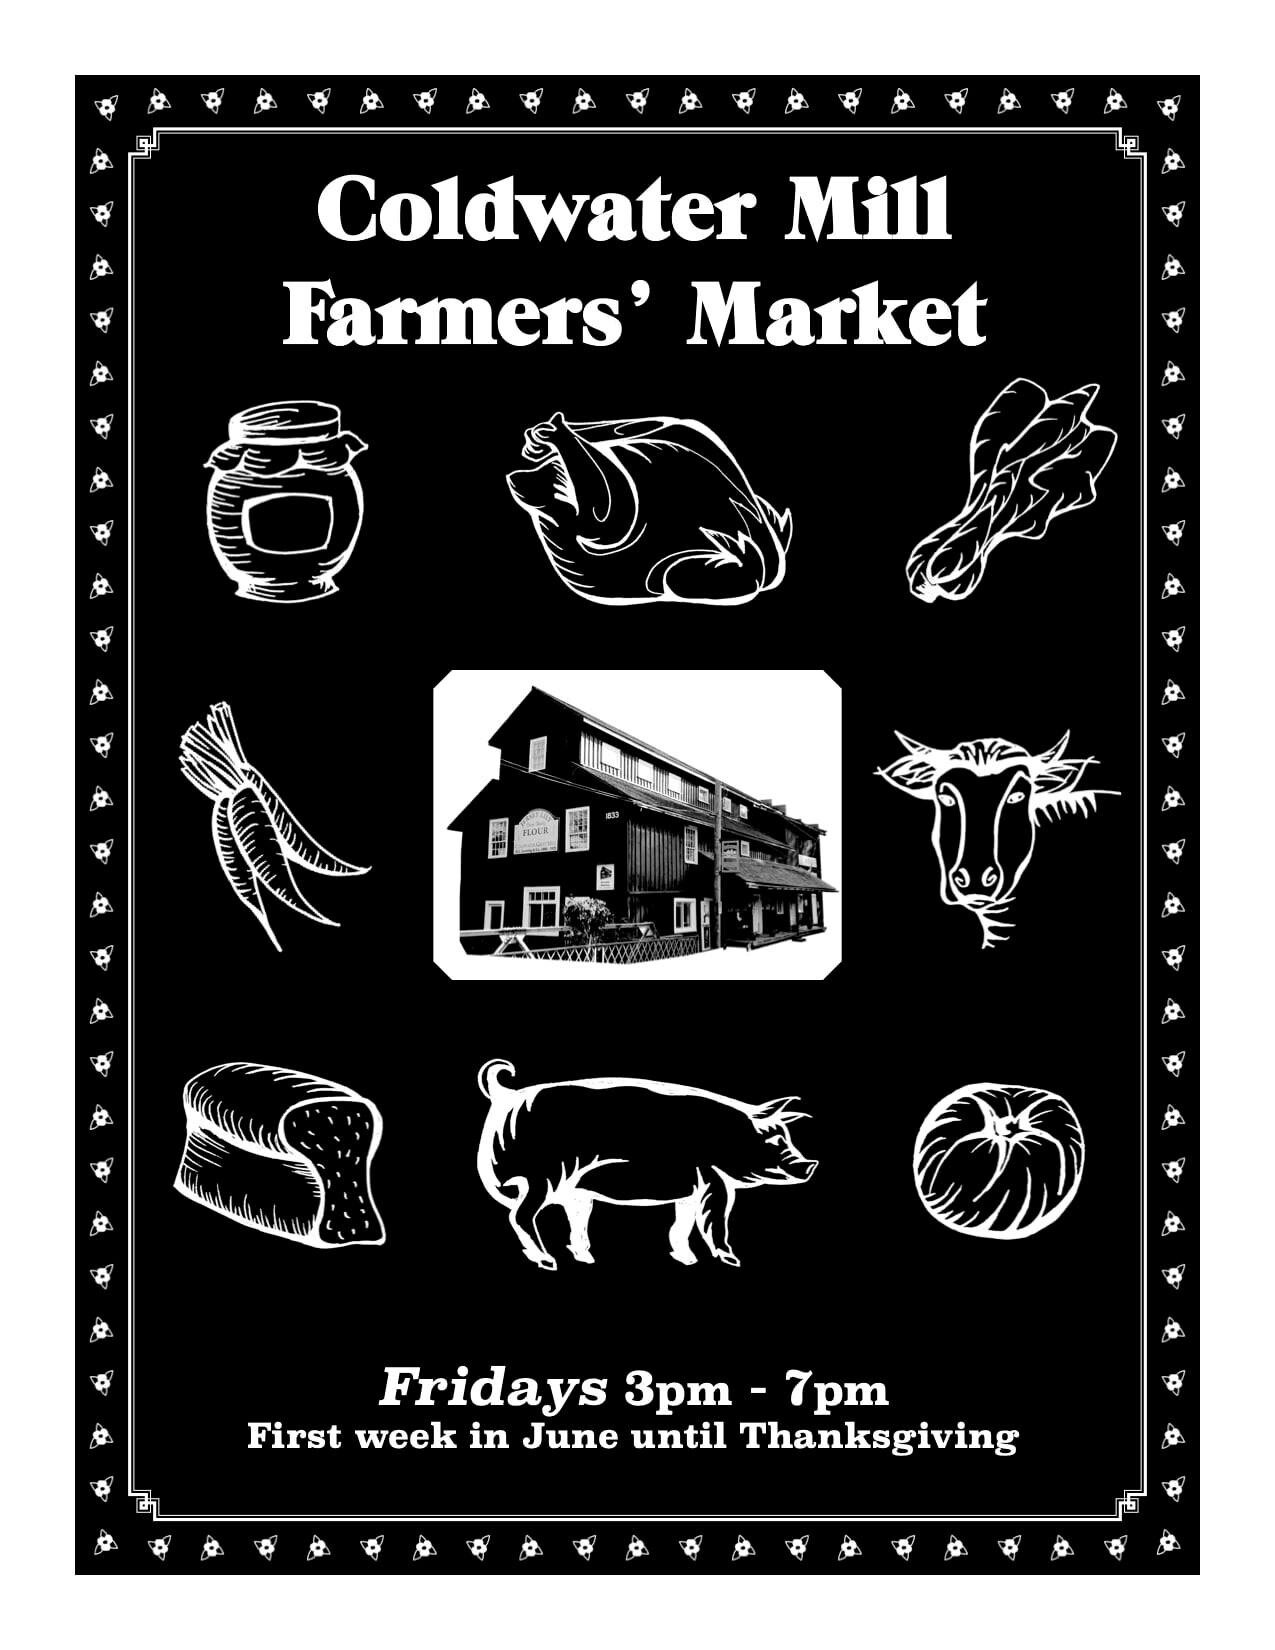 COLDWATER FARMERS’ MARKET